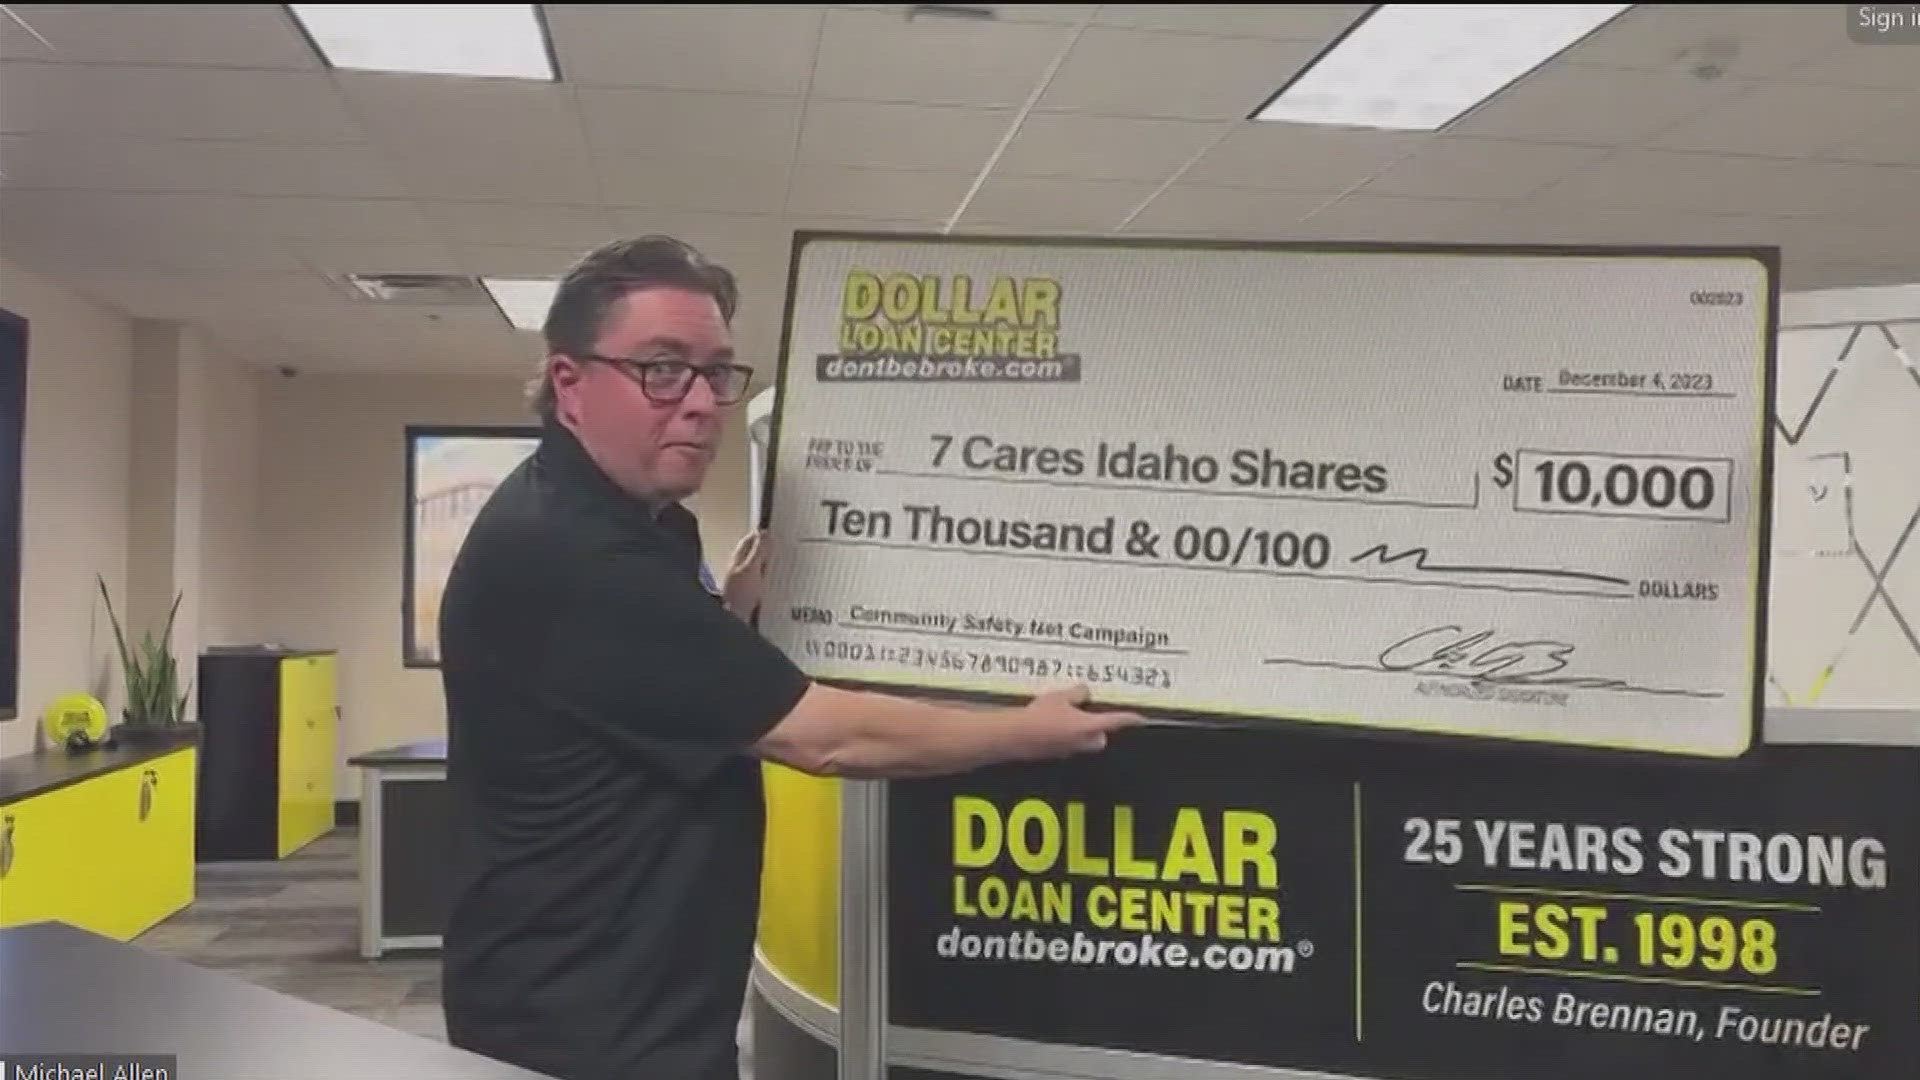 For KTVB's 16th annual 7Cares Idaho Shares campaign, Dollar Loan Center is showing support for Idahoans in need as a featured Company that Cares.